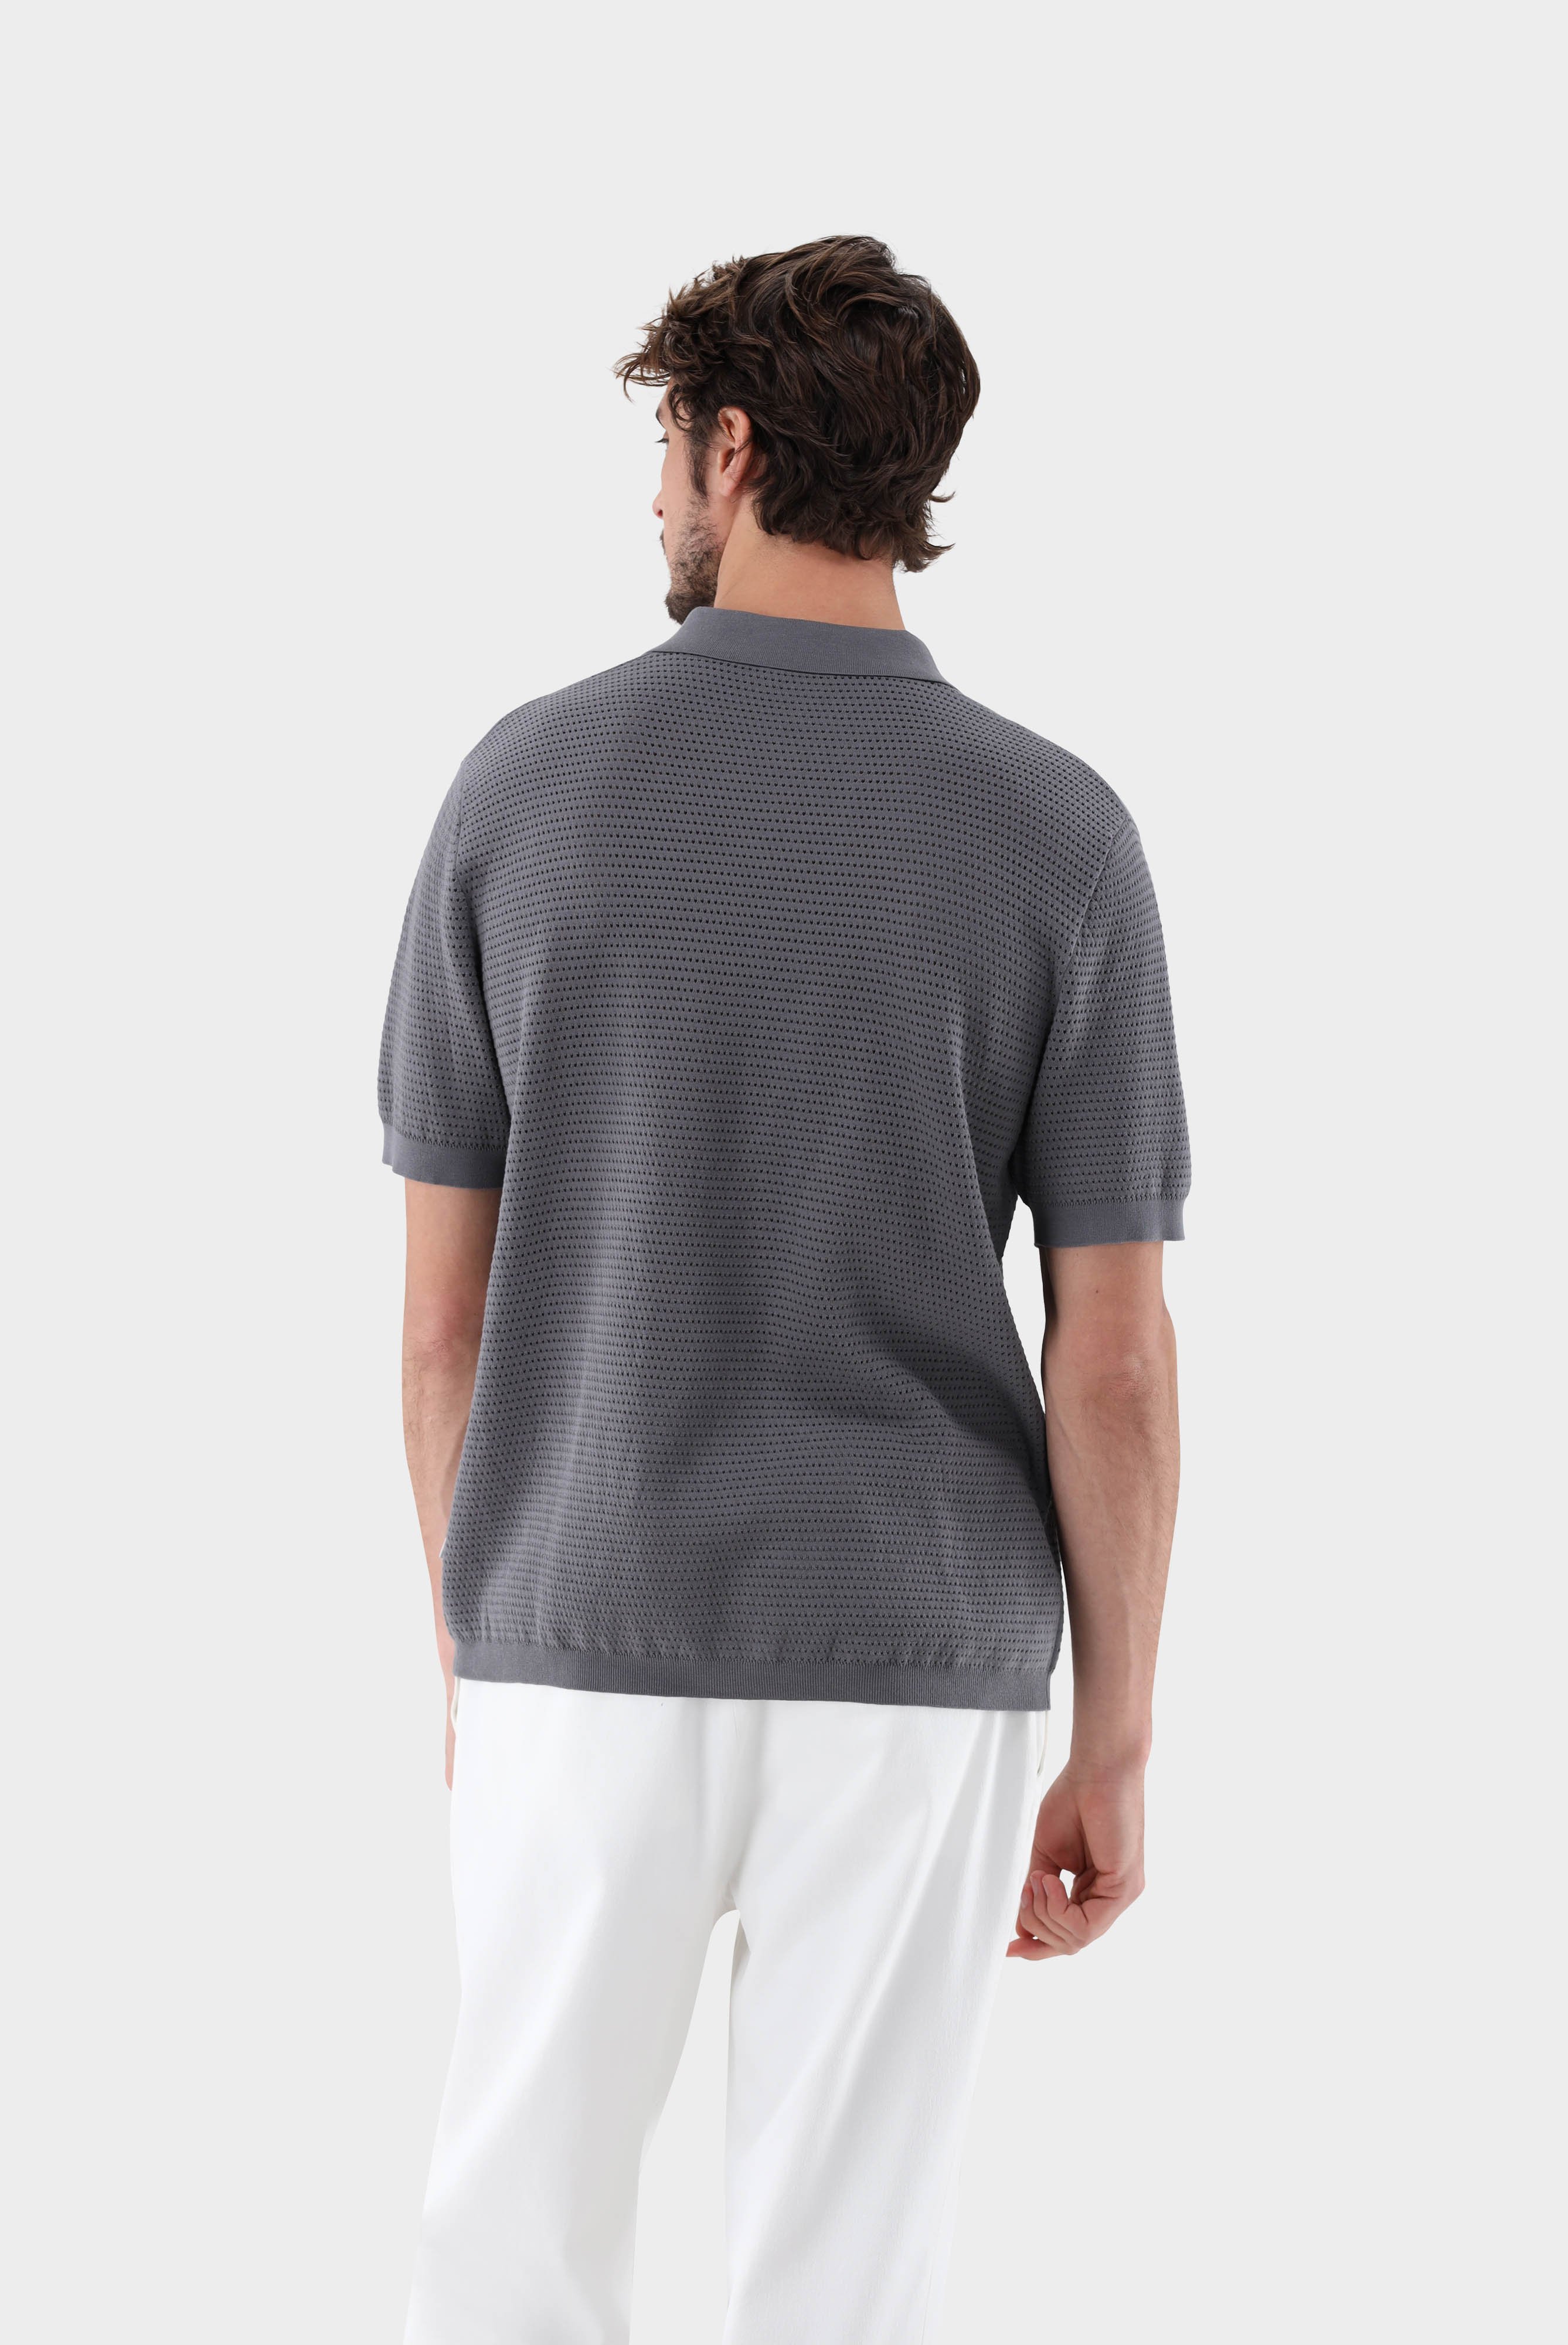 Poloshirts+Polo Shirt with Mesh Structure in Air Cotton+82.8651..S00267.070.S